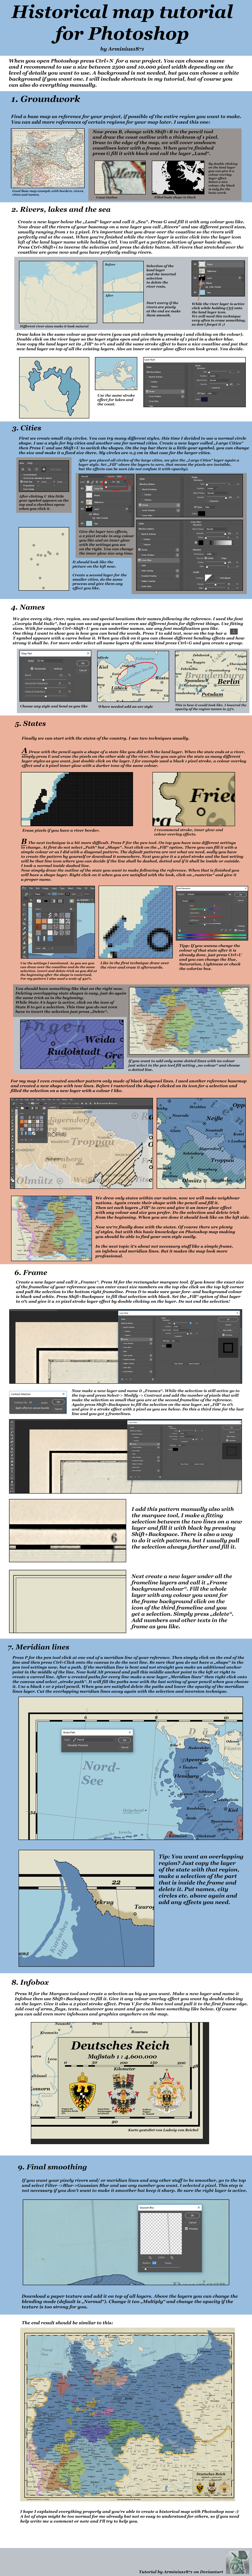 Historical Map Tutorial for Photoshop